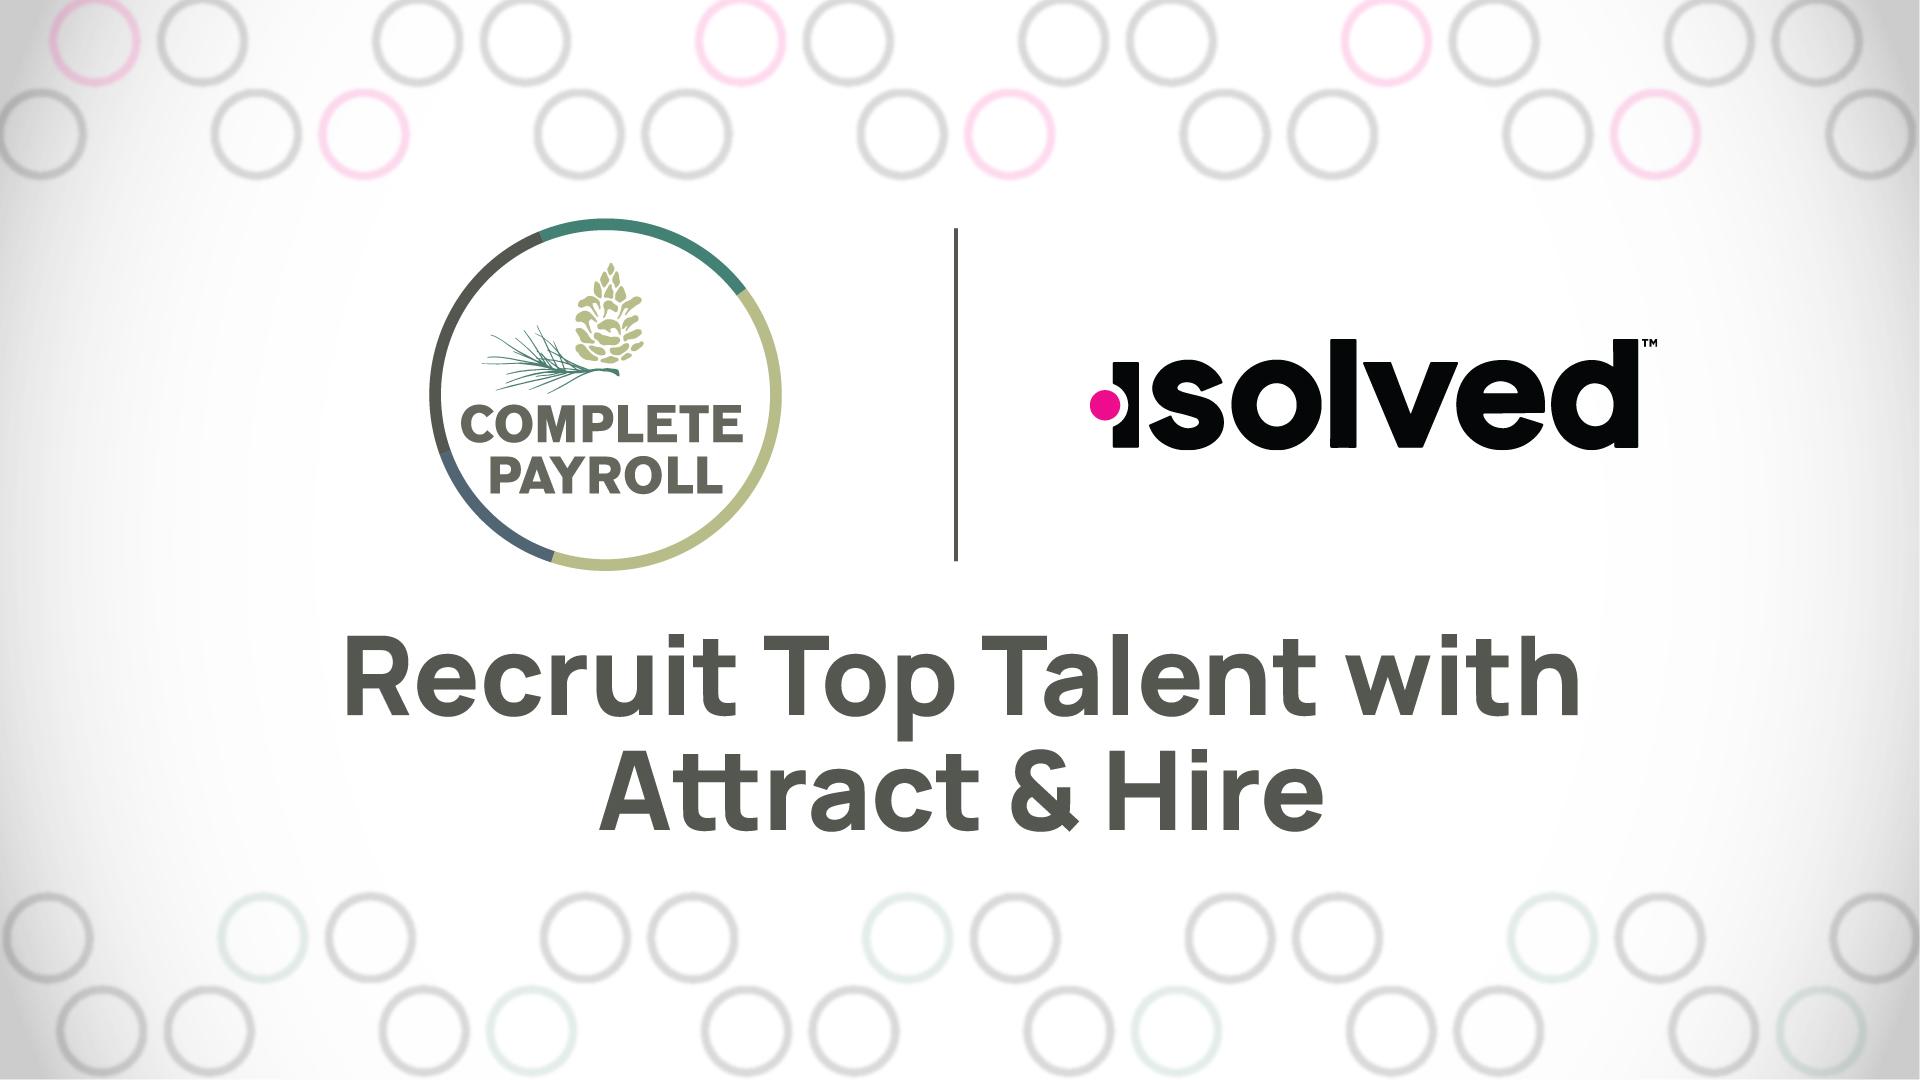 Recruit Top Talent with Attract & Hire